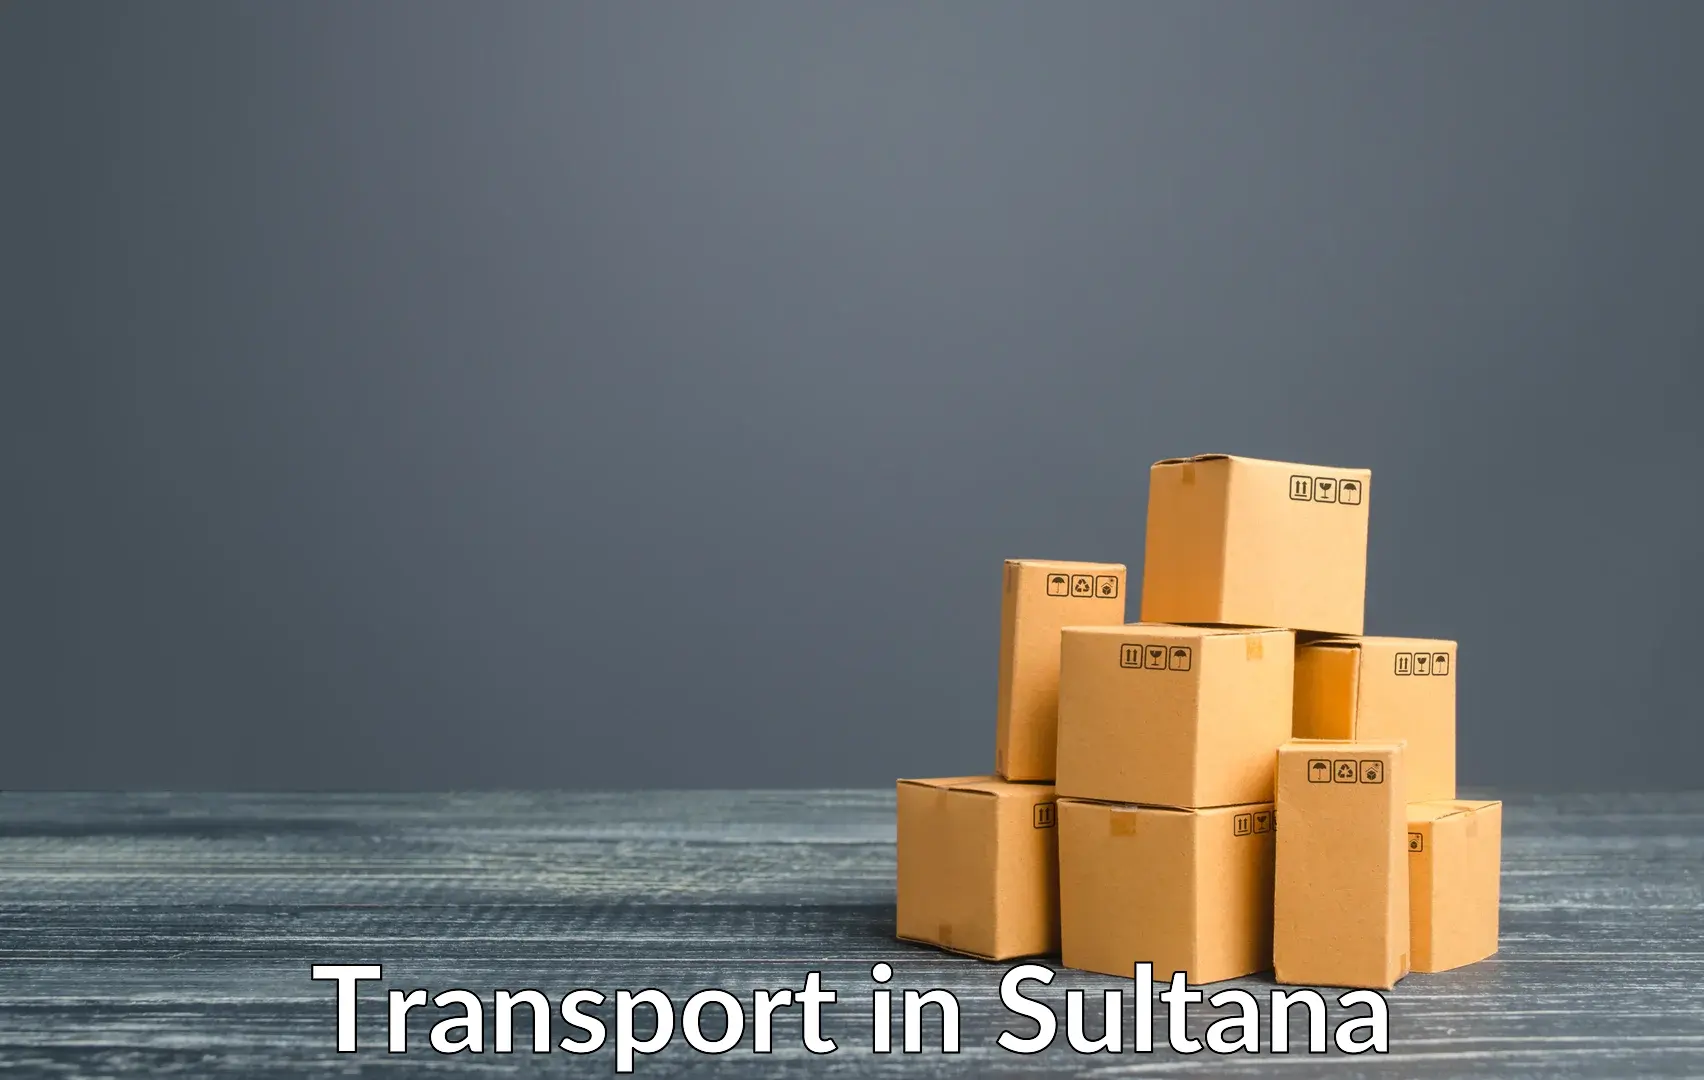 Container transport service in Sultana